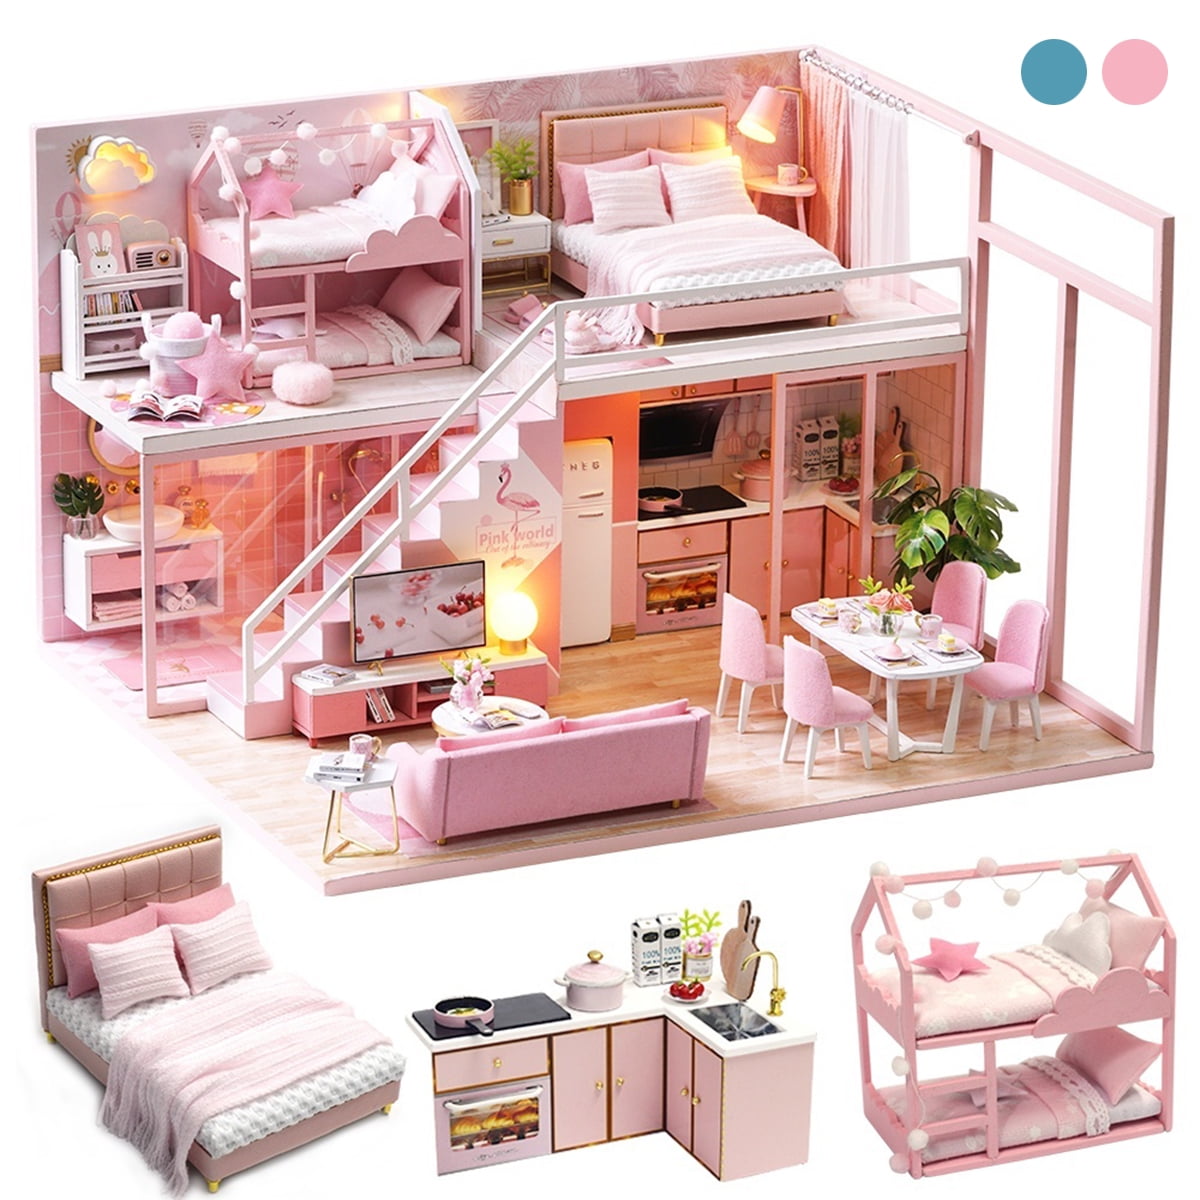 KISSTAKER Dollhouse Miniature Kit-Mini DIY Wooden Loft House with Furniture,Dust-Proof Cover,Music Movement,Assemble Tool,1:24 Scale for Teens Adults